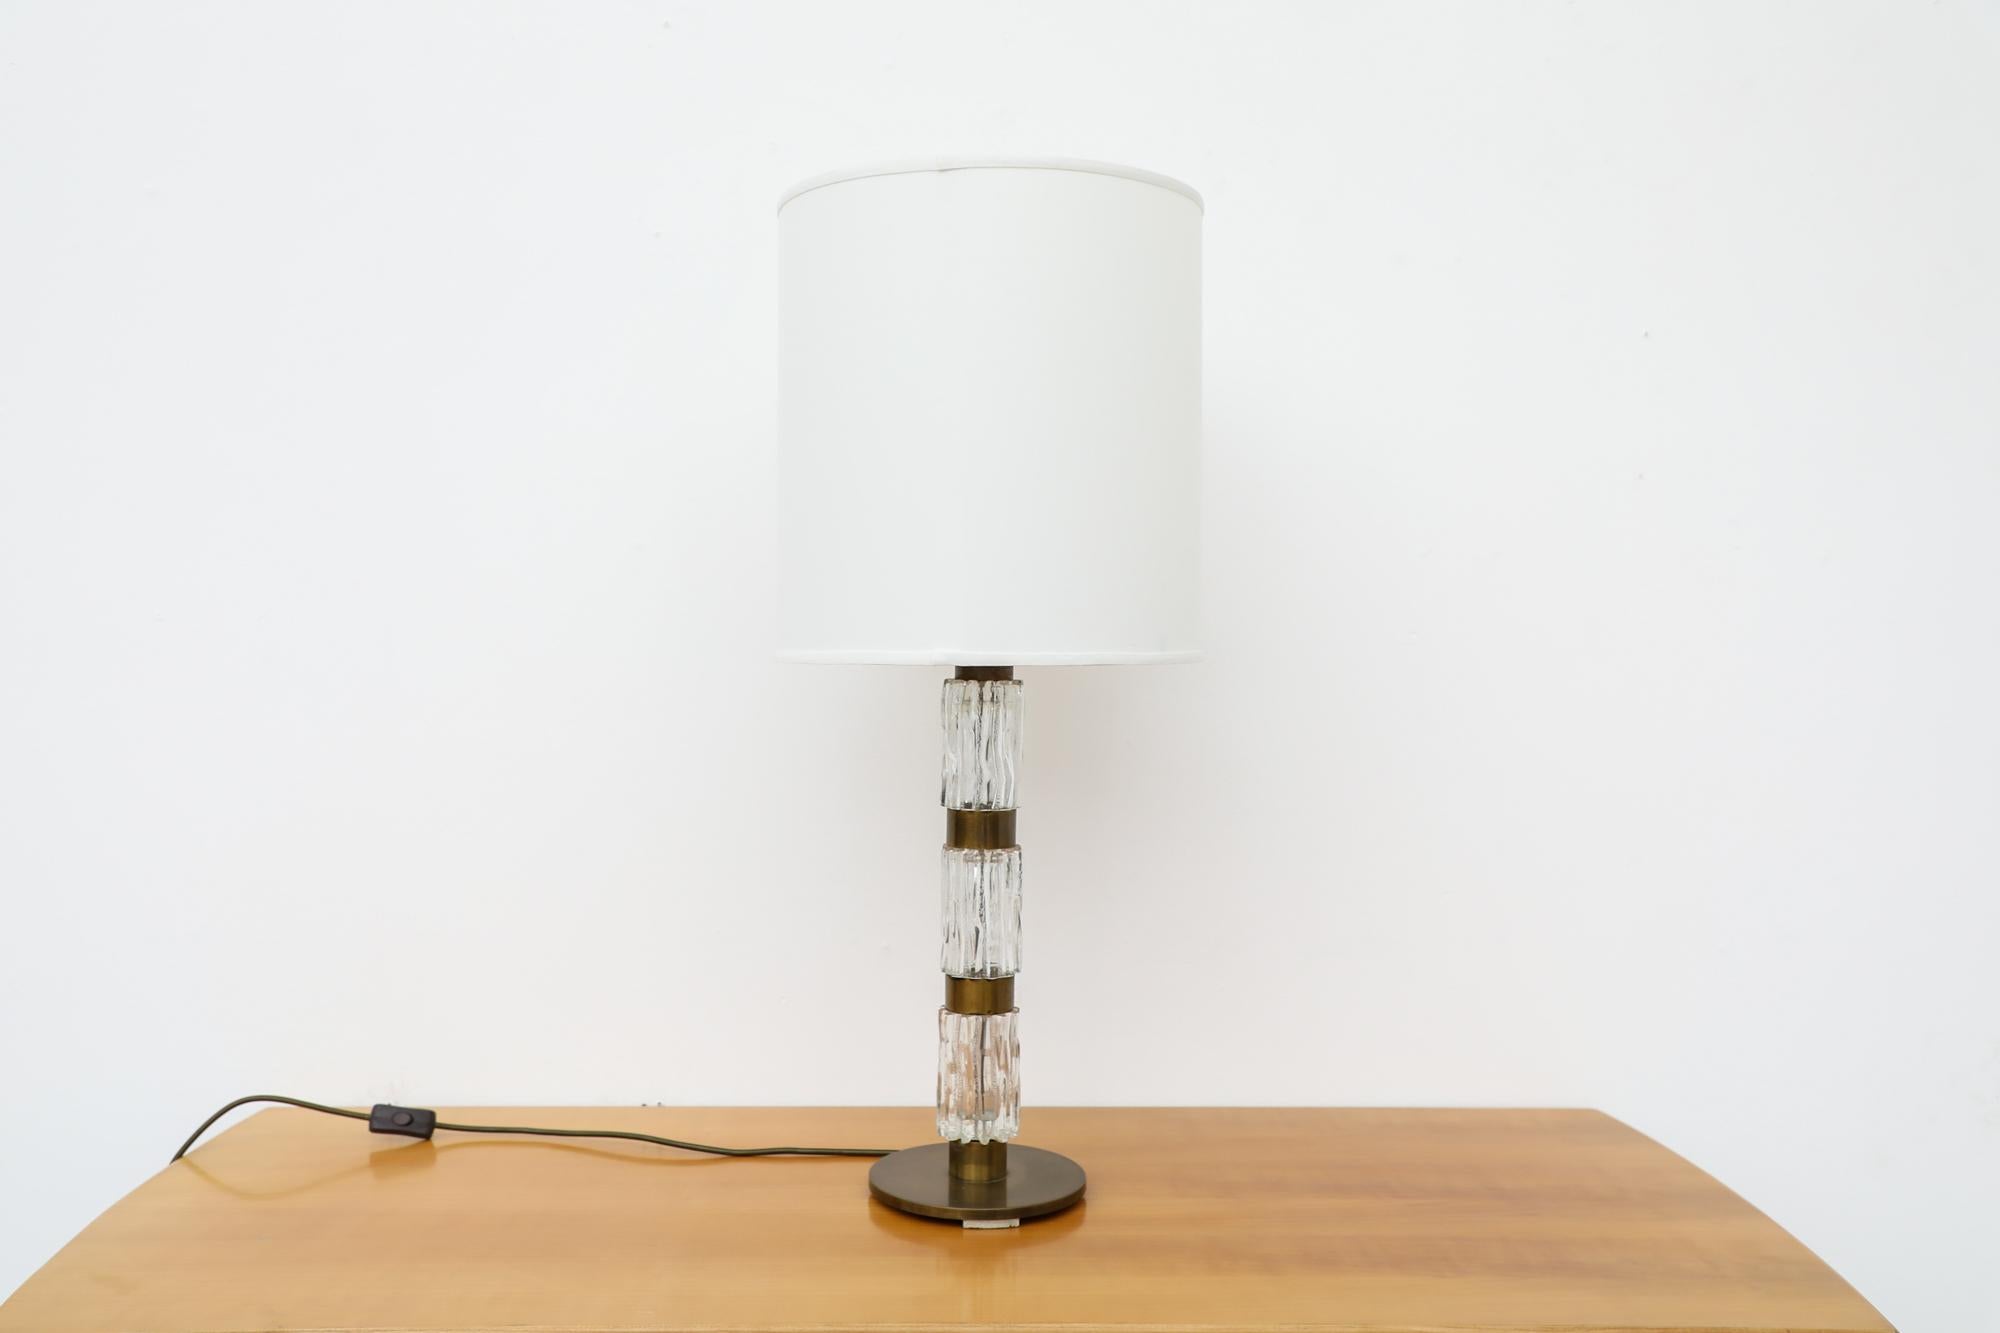 Maison Charles Inspired crystal and chrome lamp by Richard Essig for Kalmar. Shown with newer linen shade, sold separately. In original condition with visible wear consistent with its age and use.